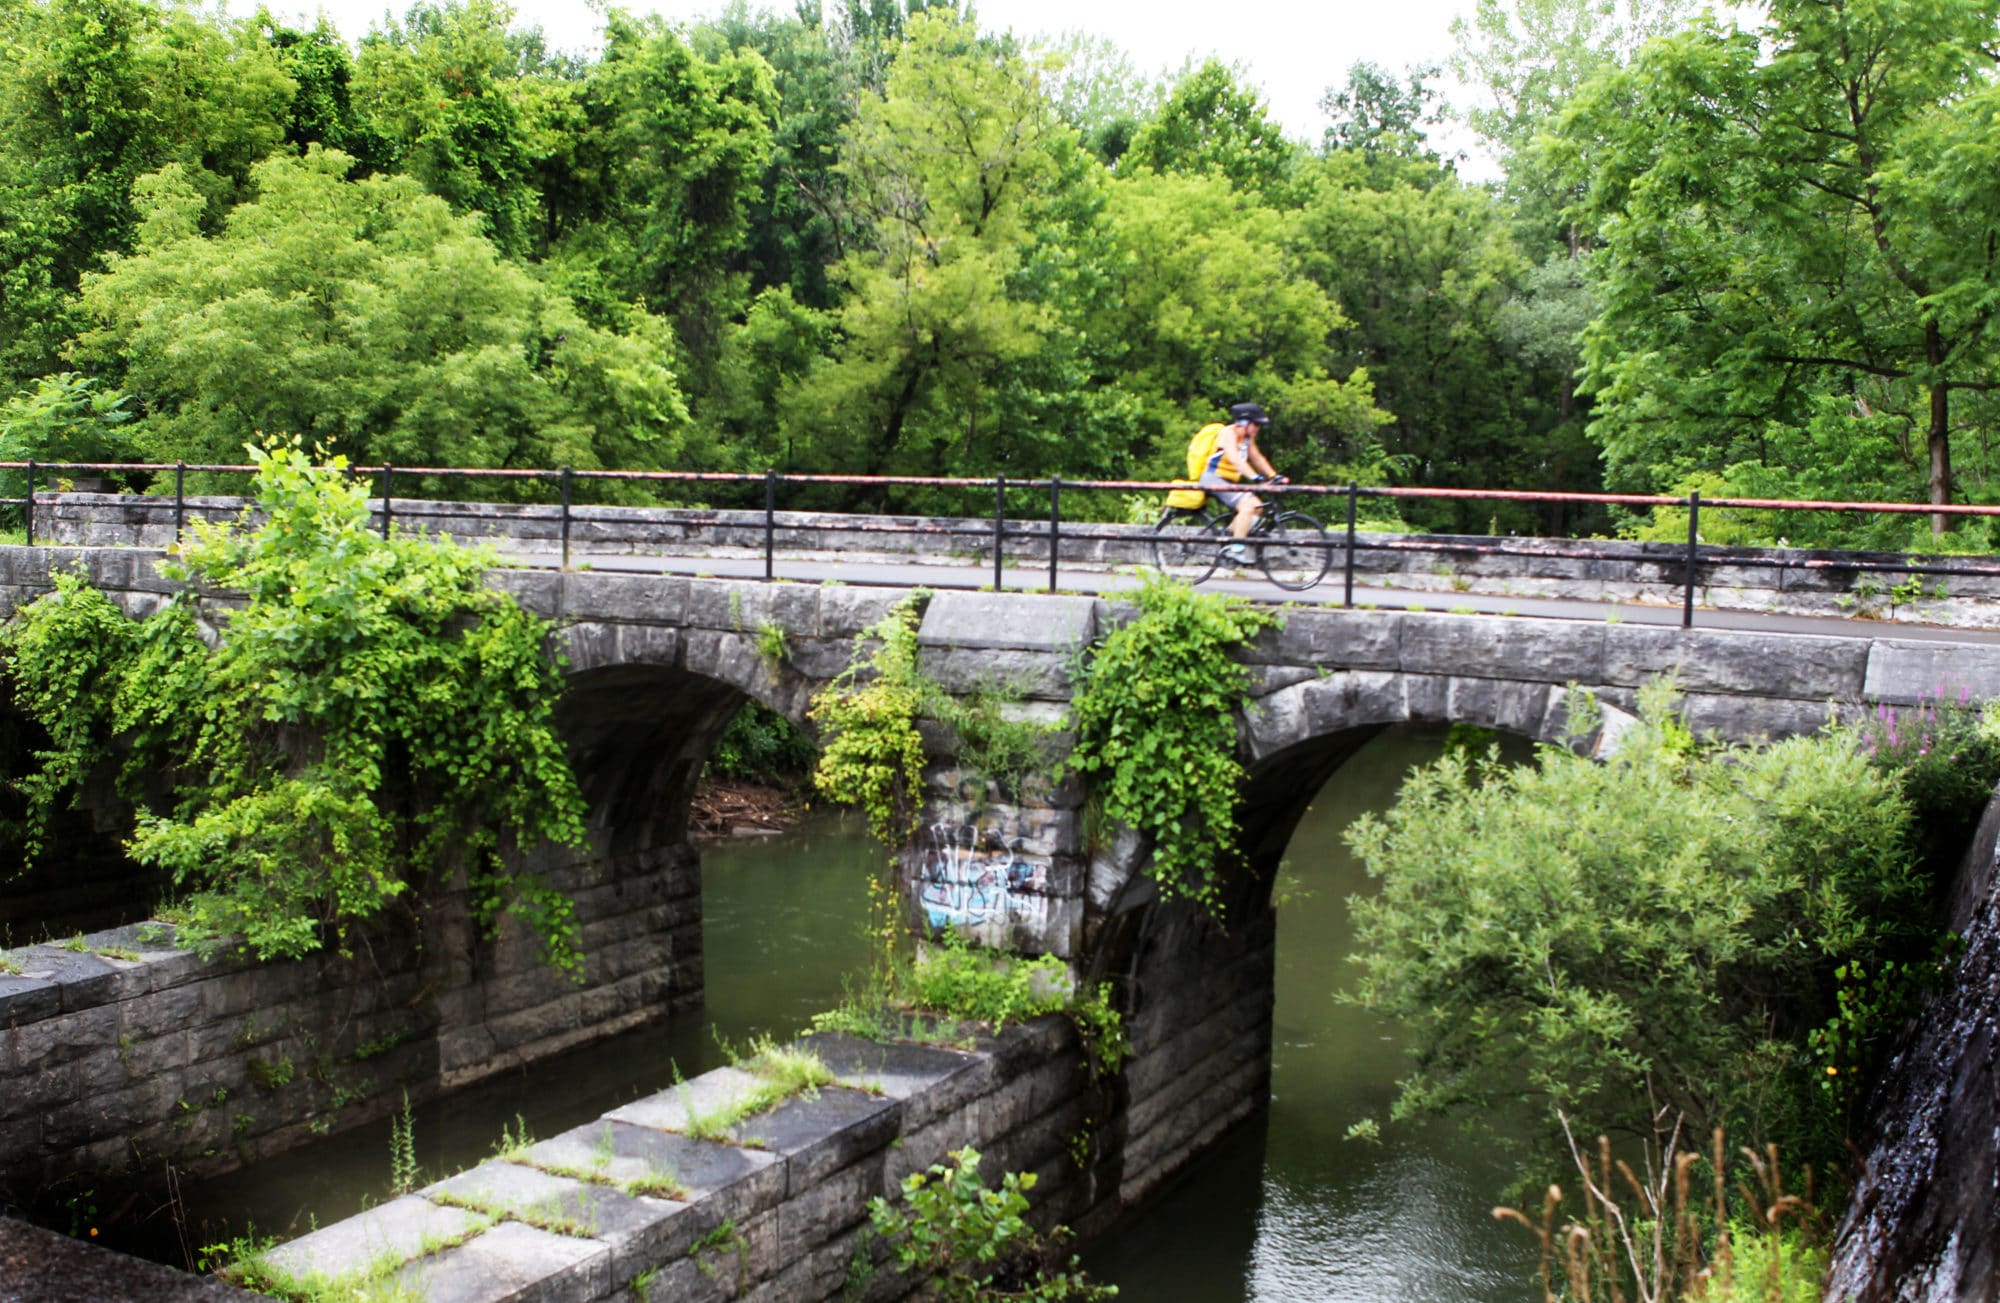 Hung with vines and greenery, an aqueduct spans Limestone Creek in Fayetteville, NY, along the Erie Canalway Trail, part of the longer Empire State Trail in New York State.